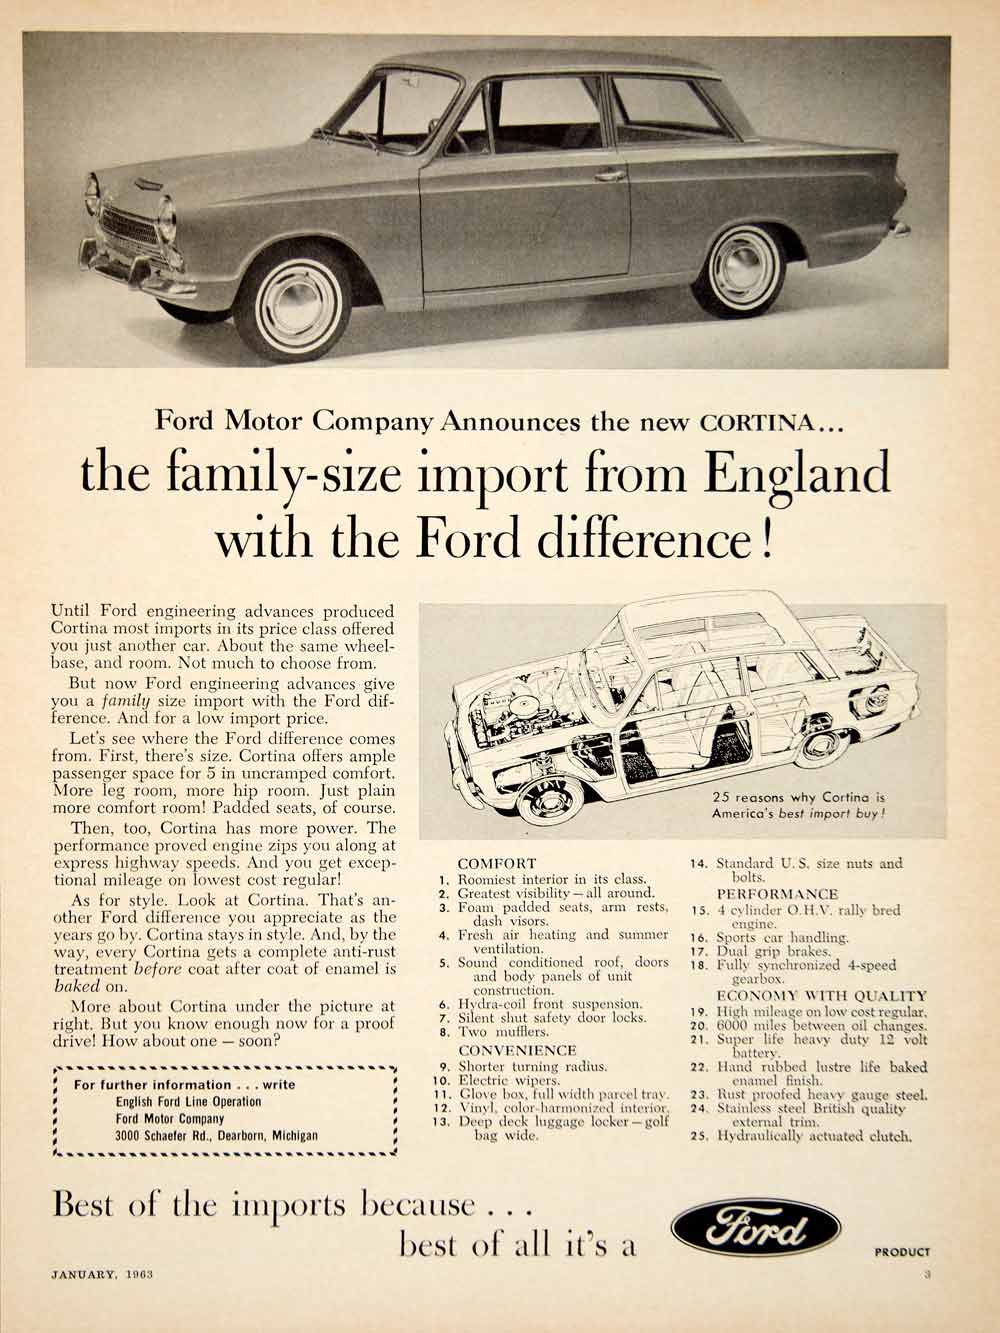 1963 Ad Ford Cortina 2 Door Compact Family Car British Import 4 Cylinder YCD2